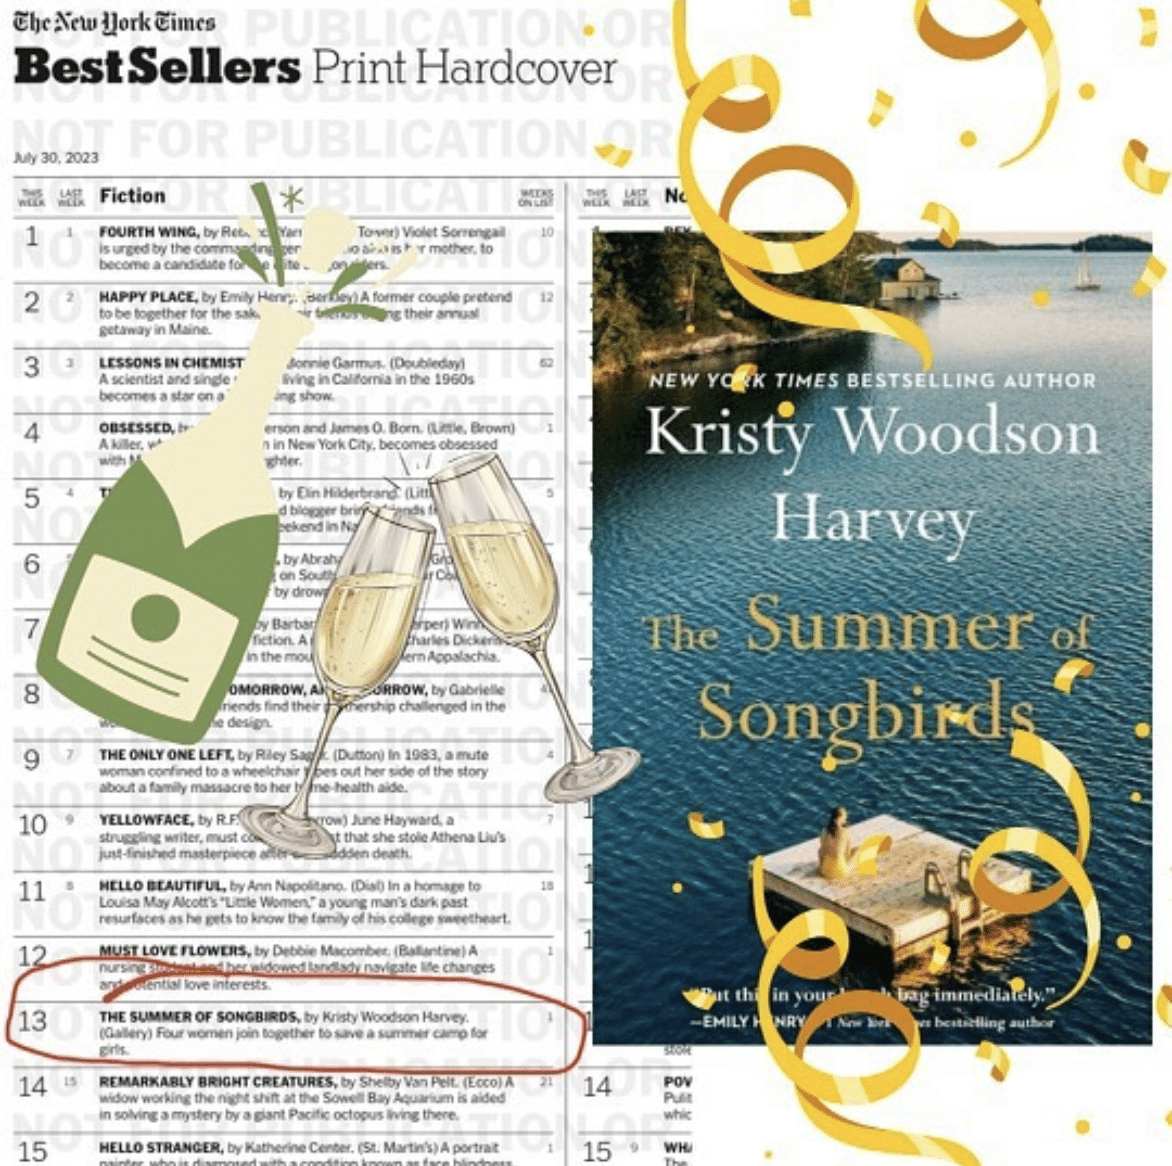 Thank you SO much for all of your support of The Summer of Songbirds.  So thrilled to hit lucky #13 on the New York Times Bestseller List!!! Kristy Woodson Harvey - The Summer of Songbirds